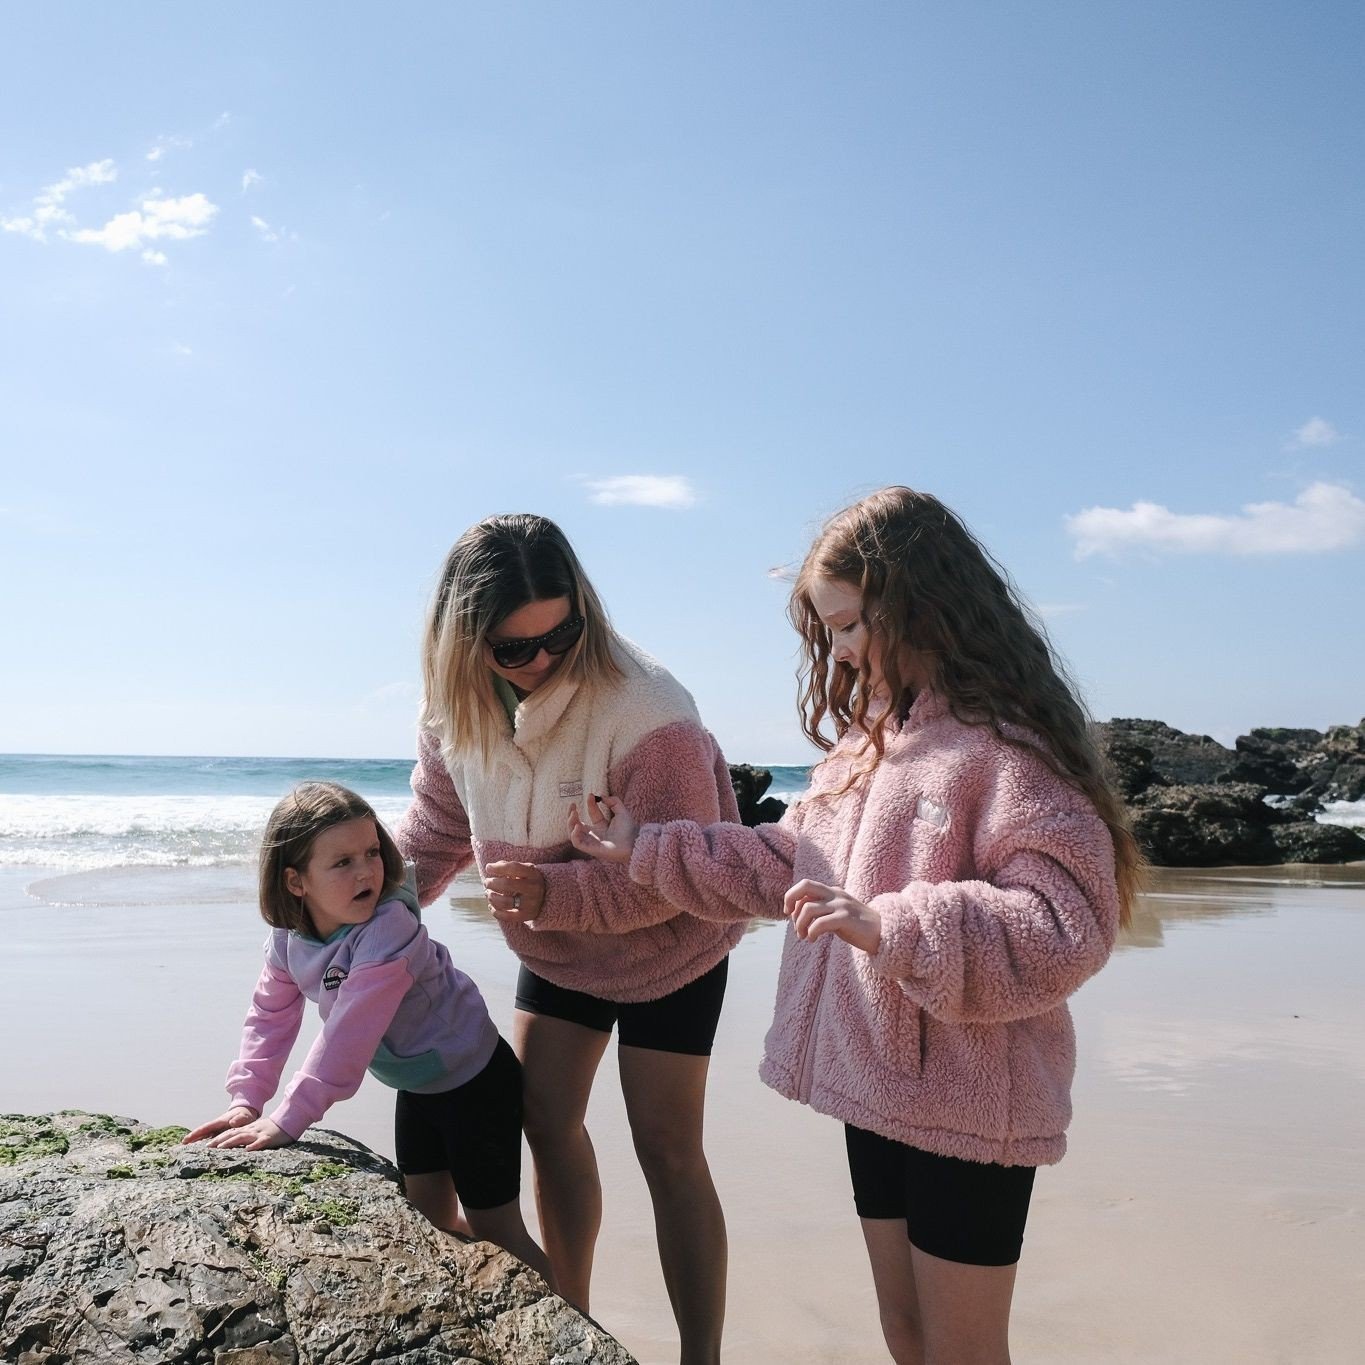 Mother's Day is just around the corner, and what better way to celebrate than with our Mum and Mini Me cozy teddy fleece jumpers! Psssttt, they also happen to be made from recycled content and are warm as.⁠
⁠
Show your love for both our planet and yo